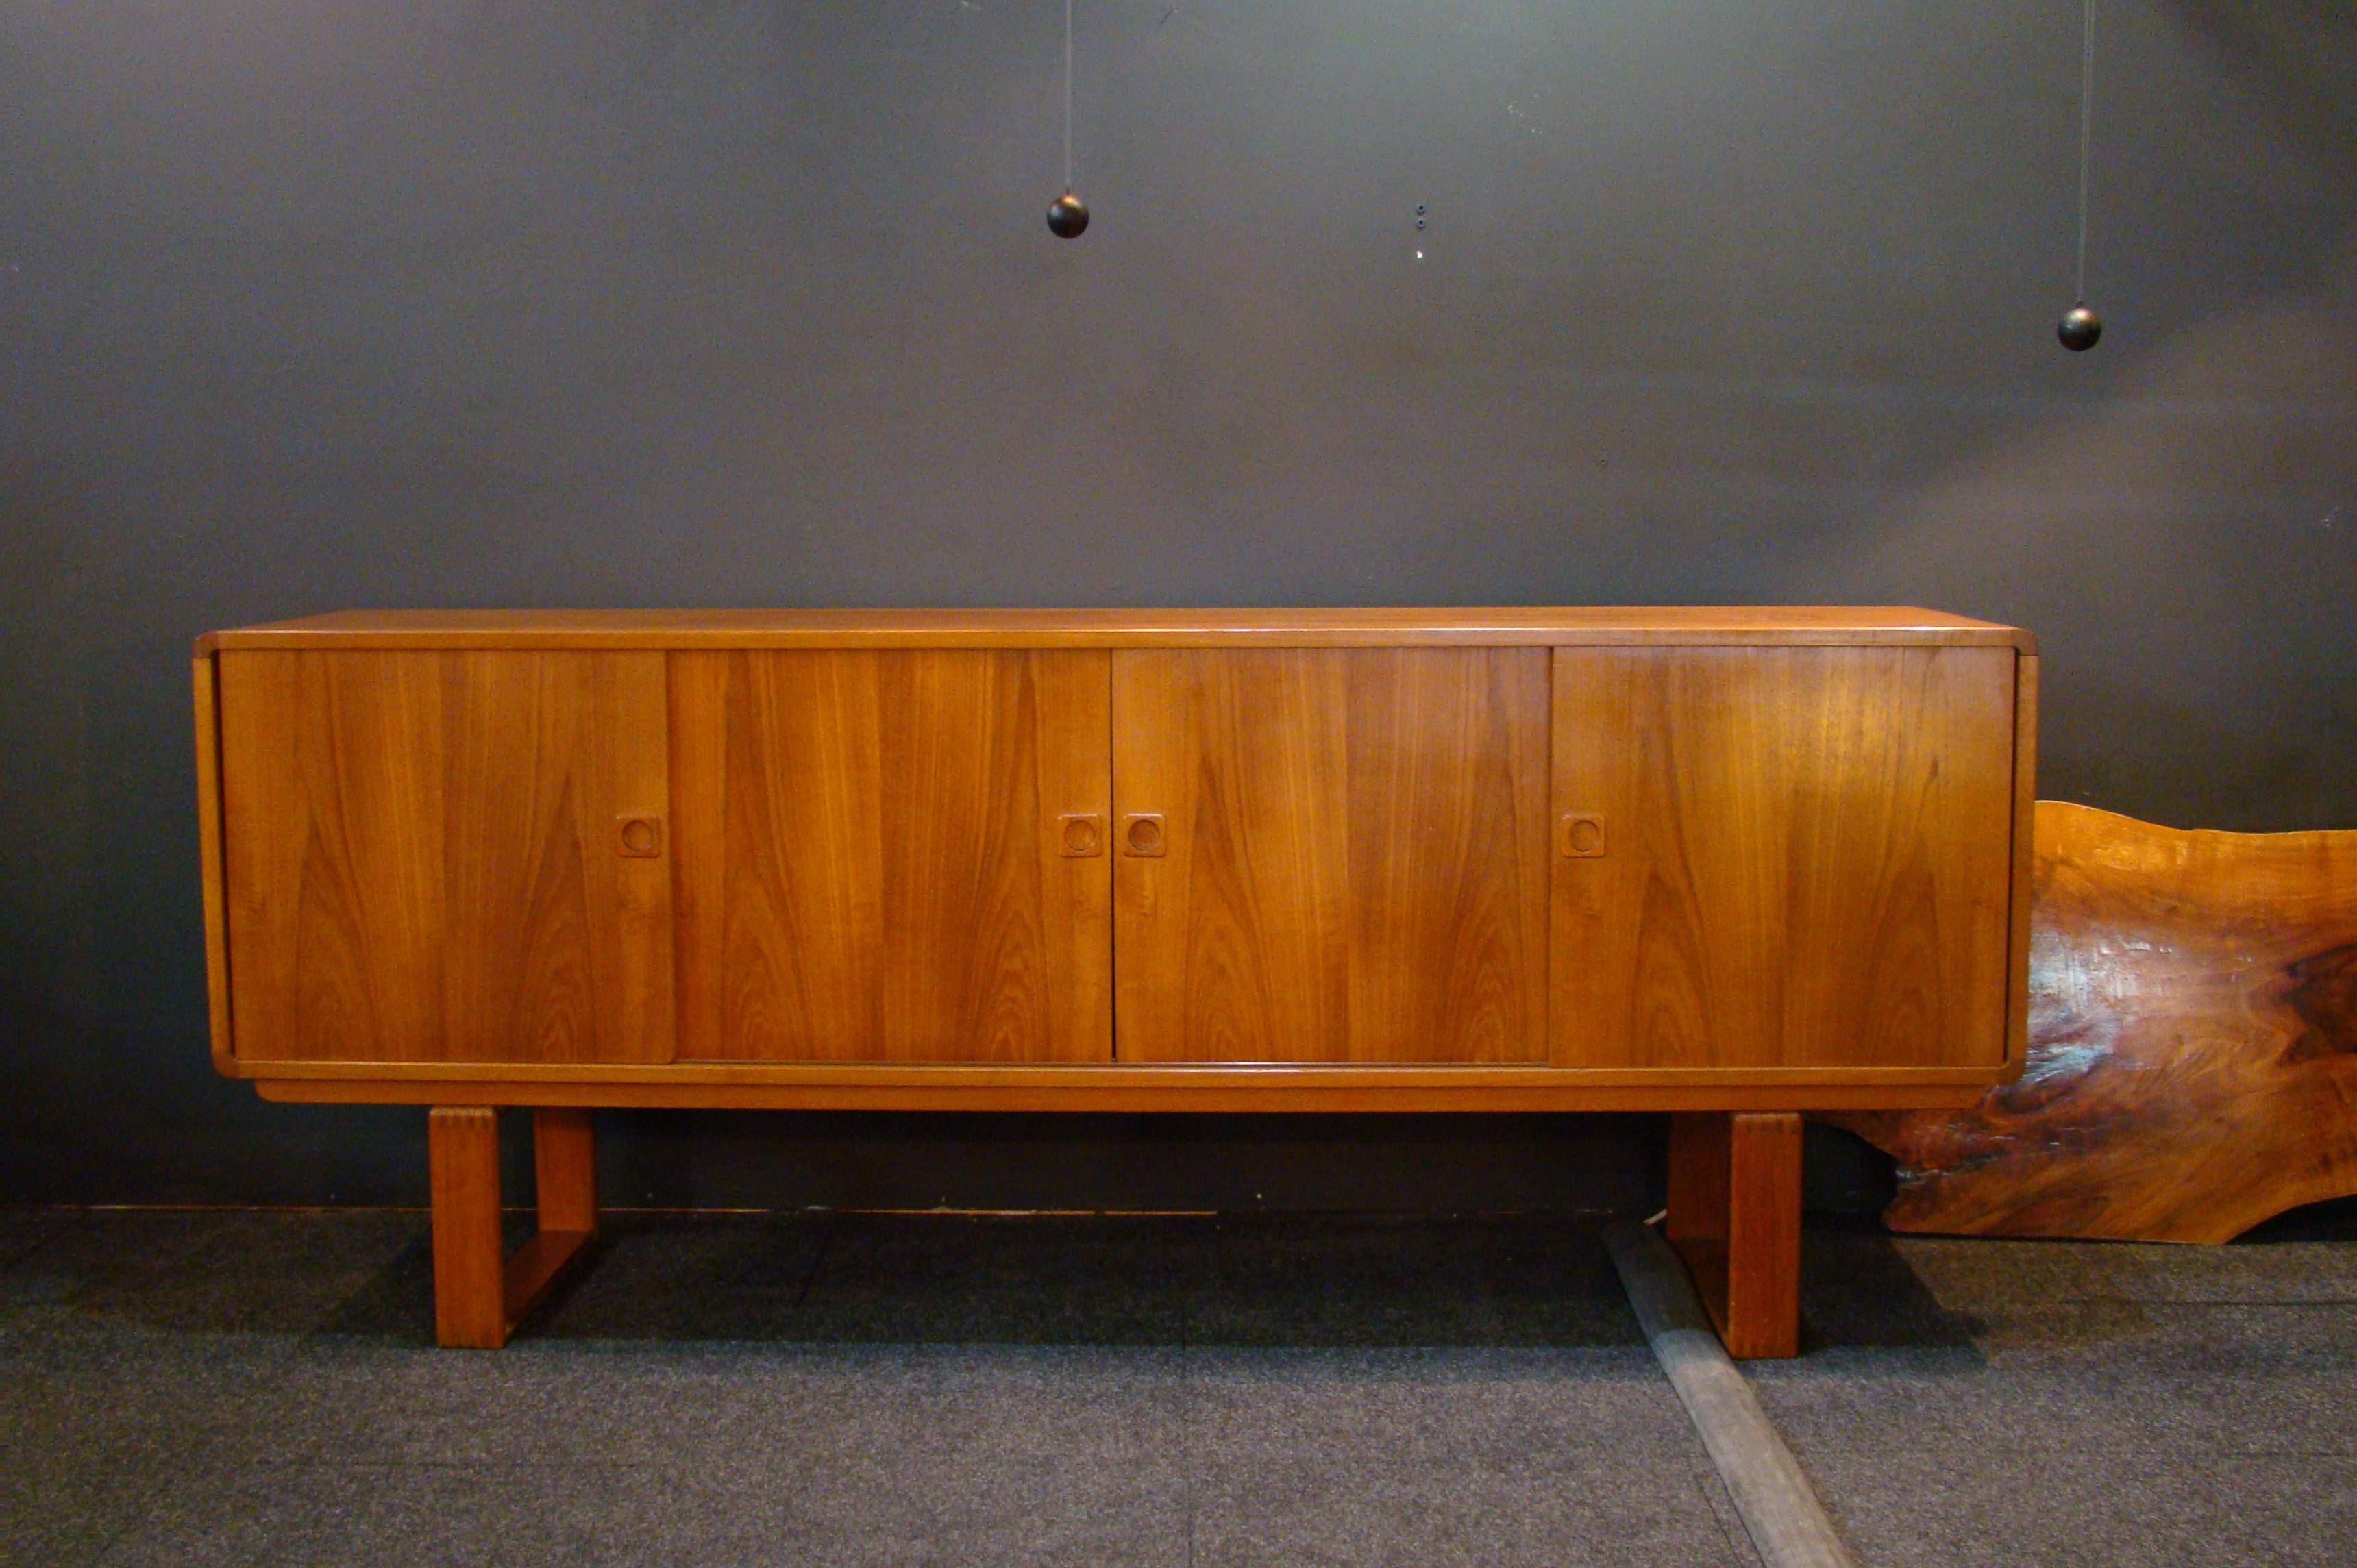 Vintage teak sideboard circa 1969 credited to Klausen and Son, Silkeborg, Denmark. The cabinet has four pass-by doors concealing four felt lined flatware drawers left, a large 39